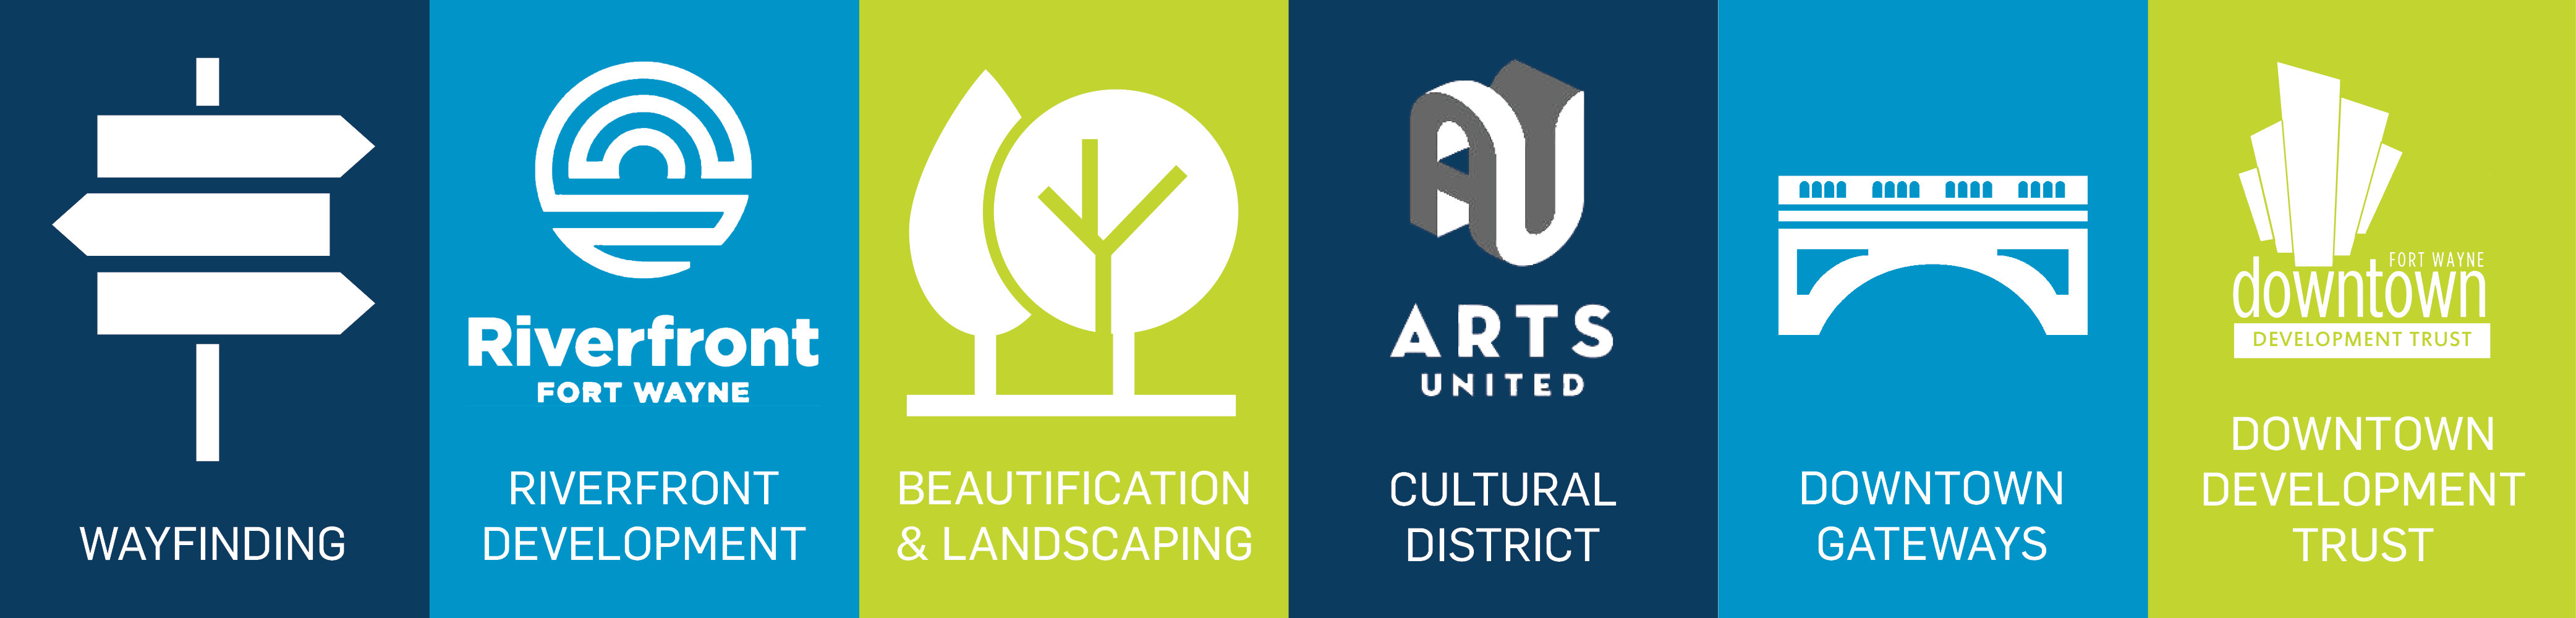 Wayfinding, Riverfront Development, beautification and landscaping, cultural district, downtown gateways, and the downtown development trust.